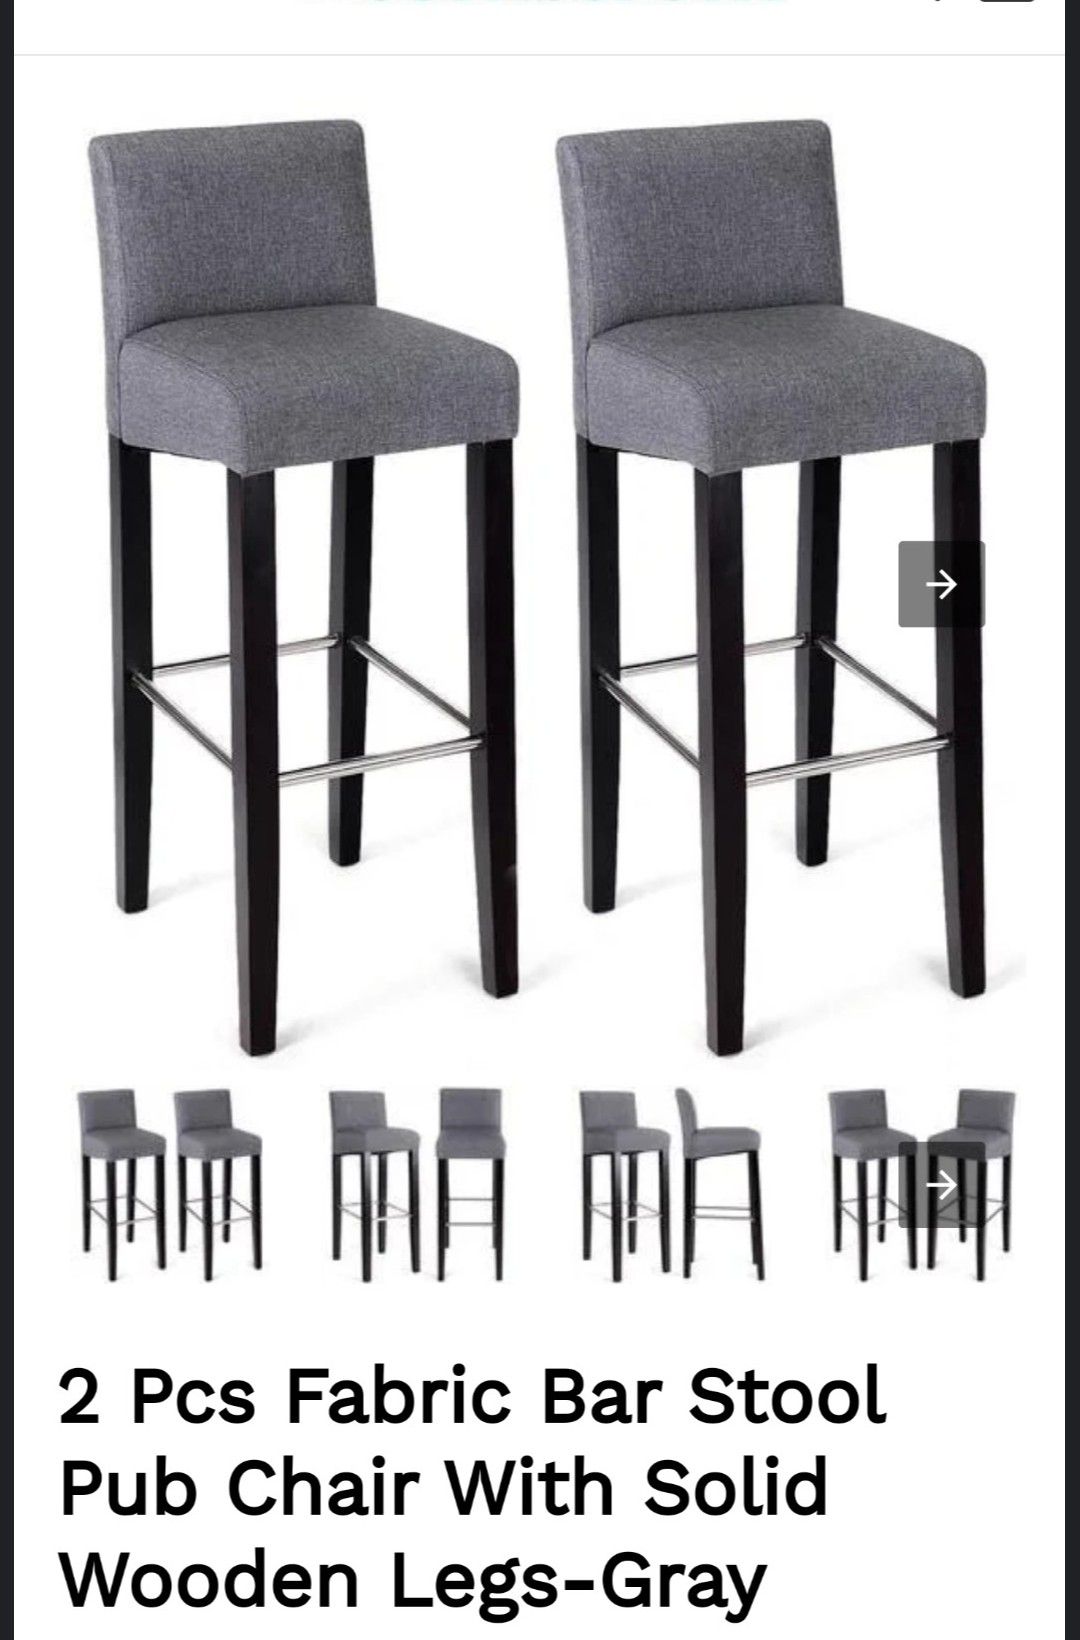 Bar Stool Pub Chair With Solid Wooden Legs